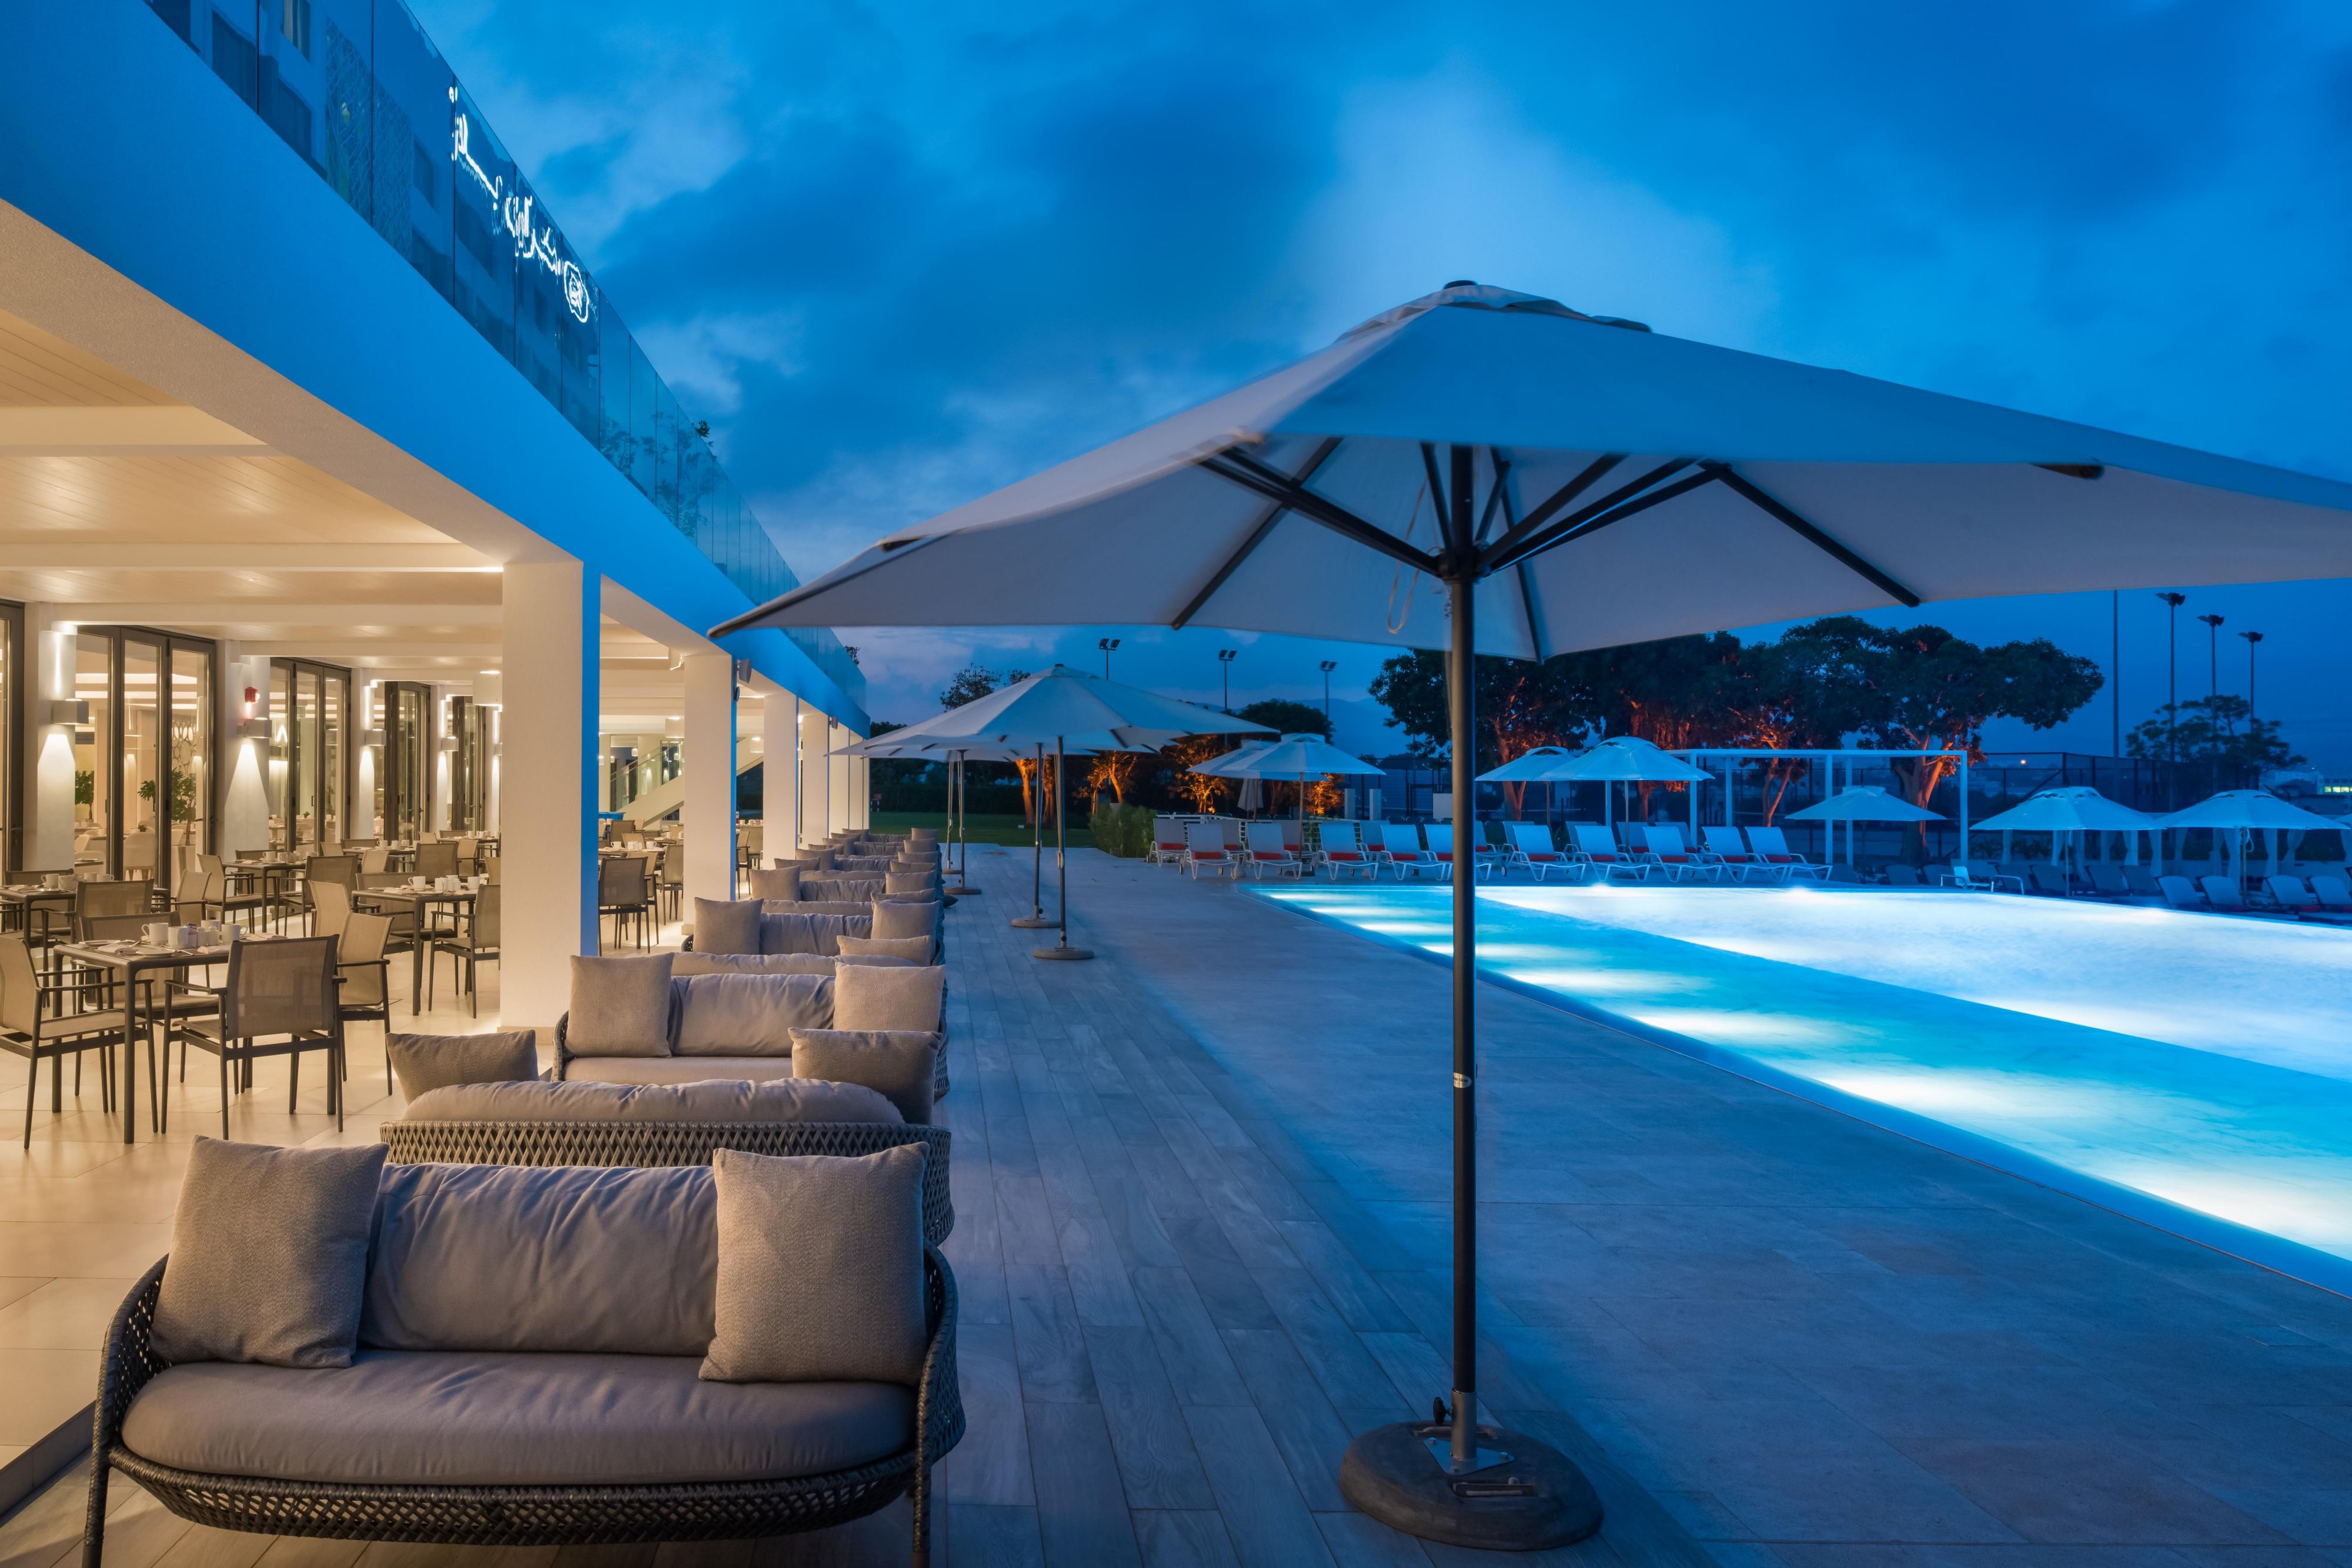 Stunning pool side terrace in the evening